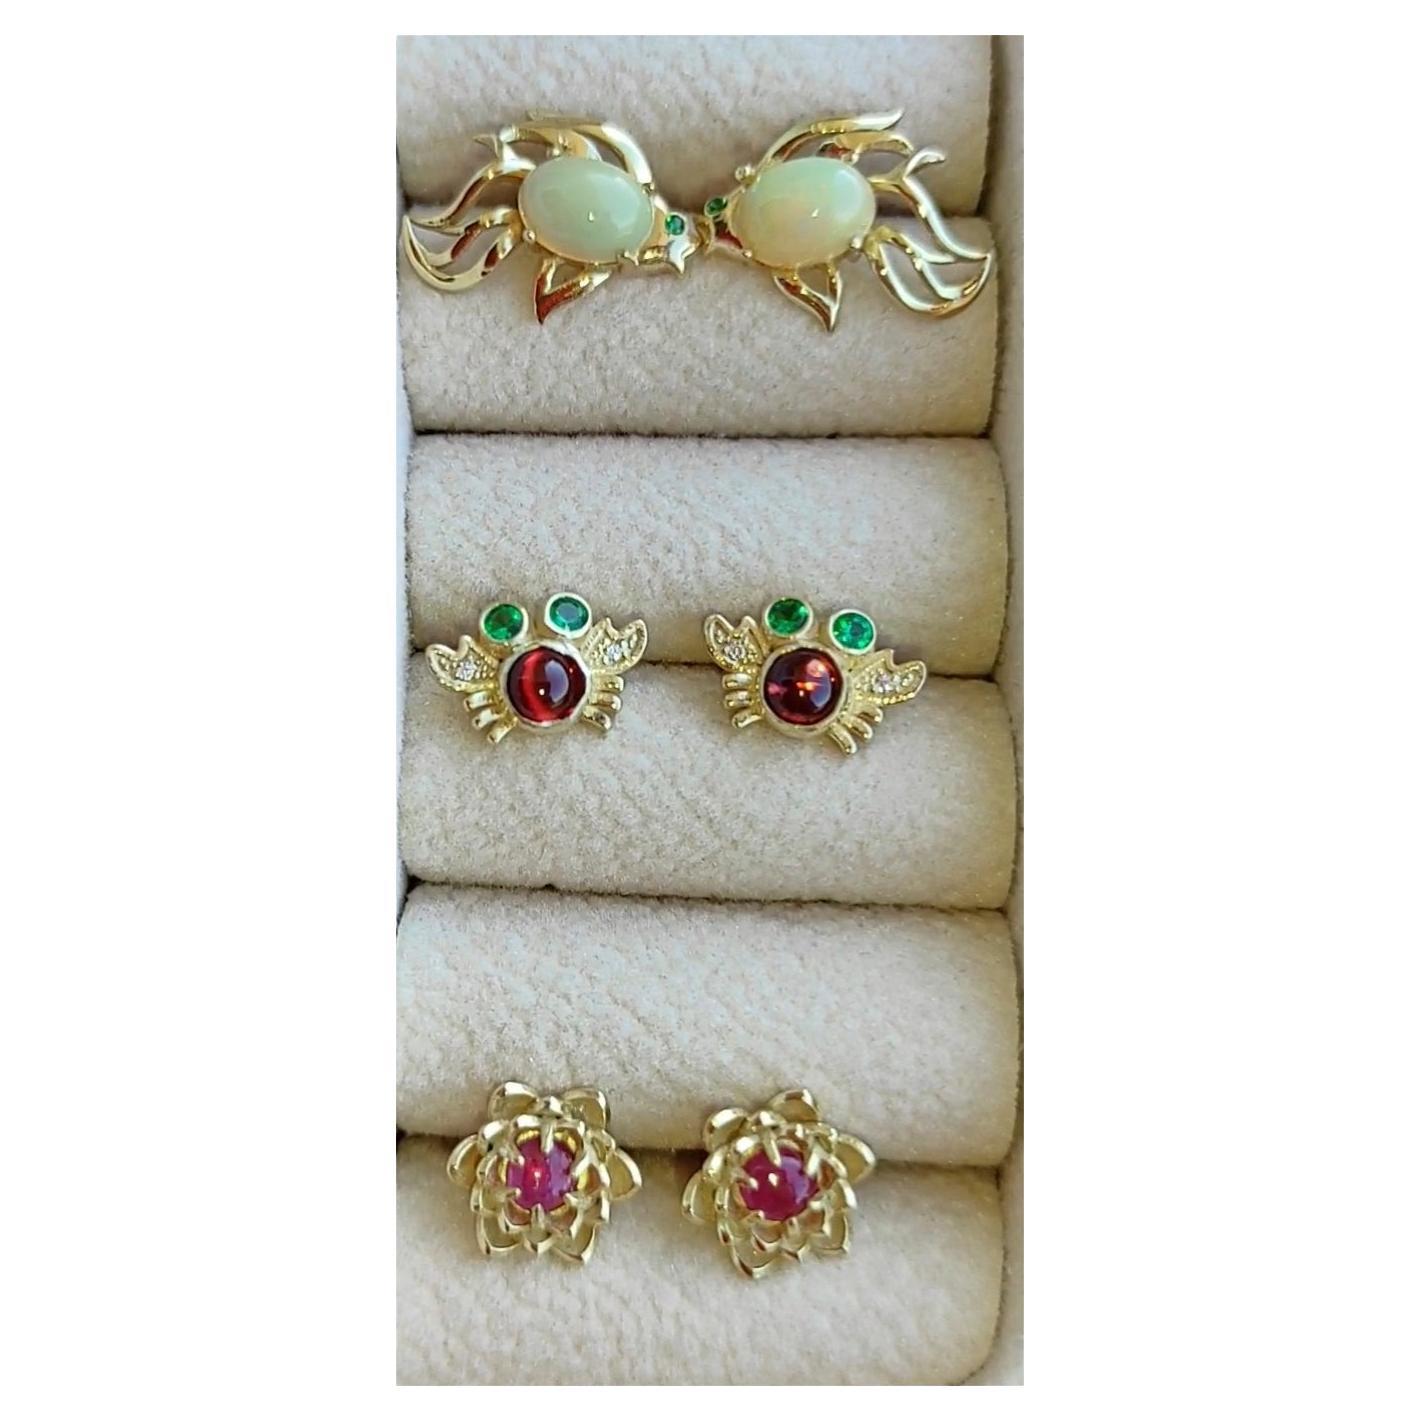 3 pair of earrings studs:  Fish, crab and flower 